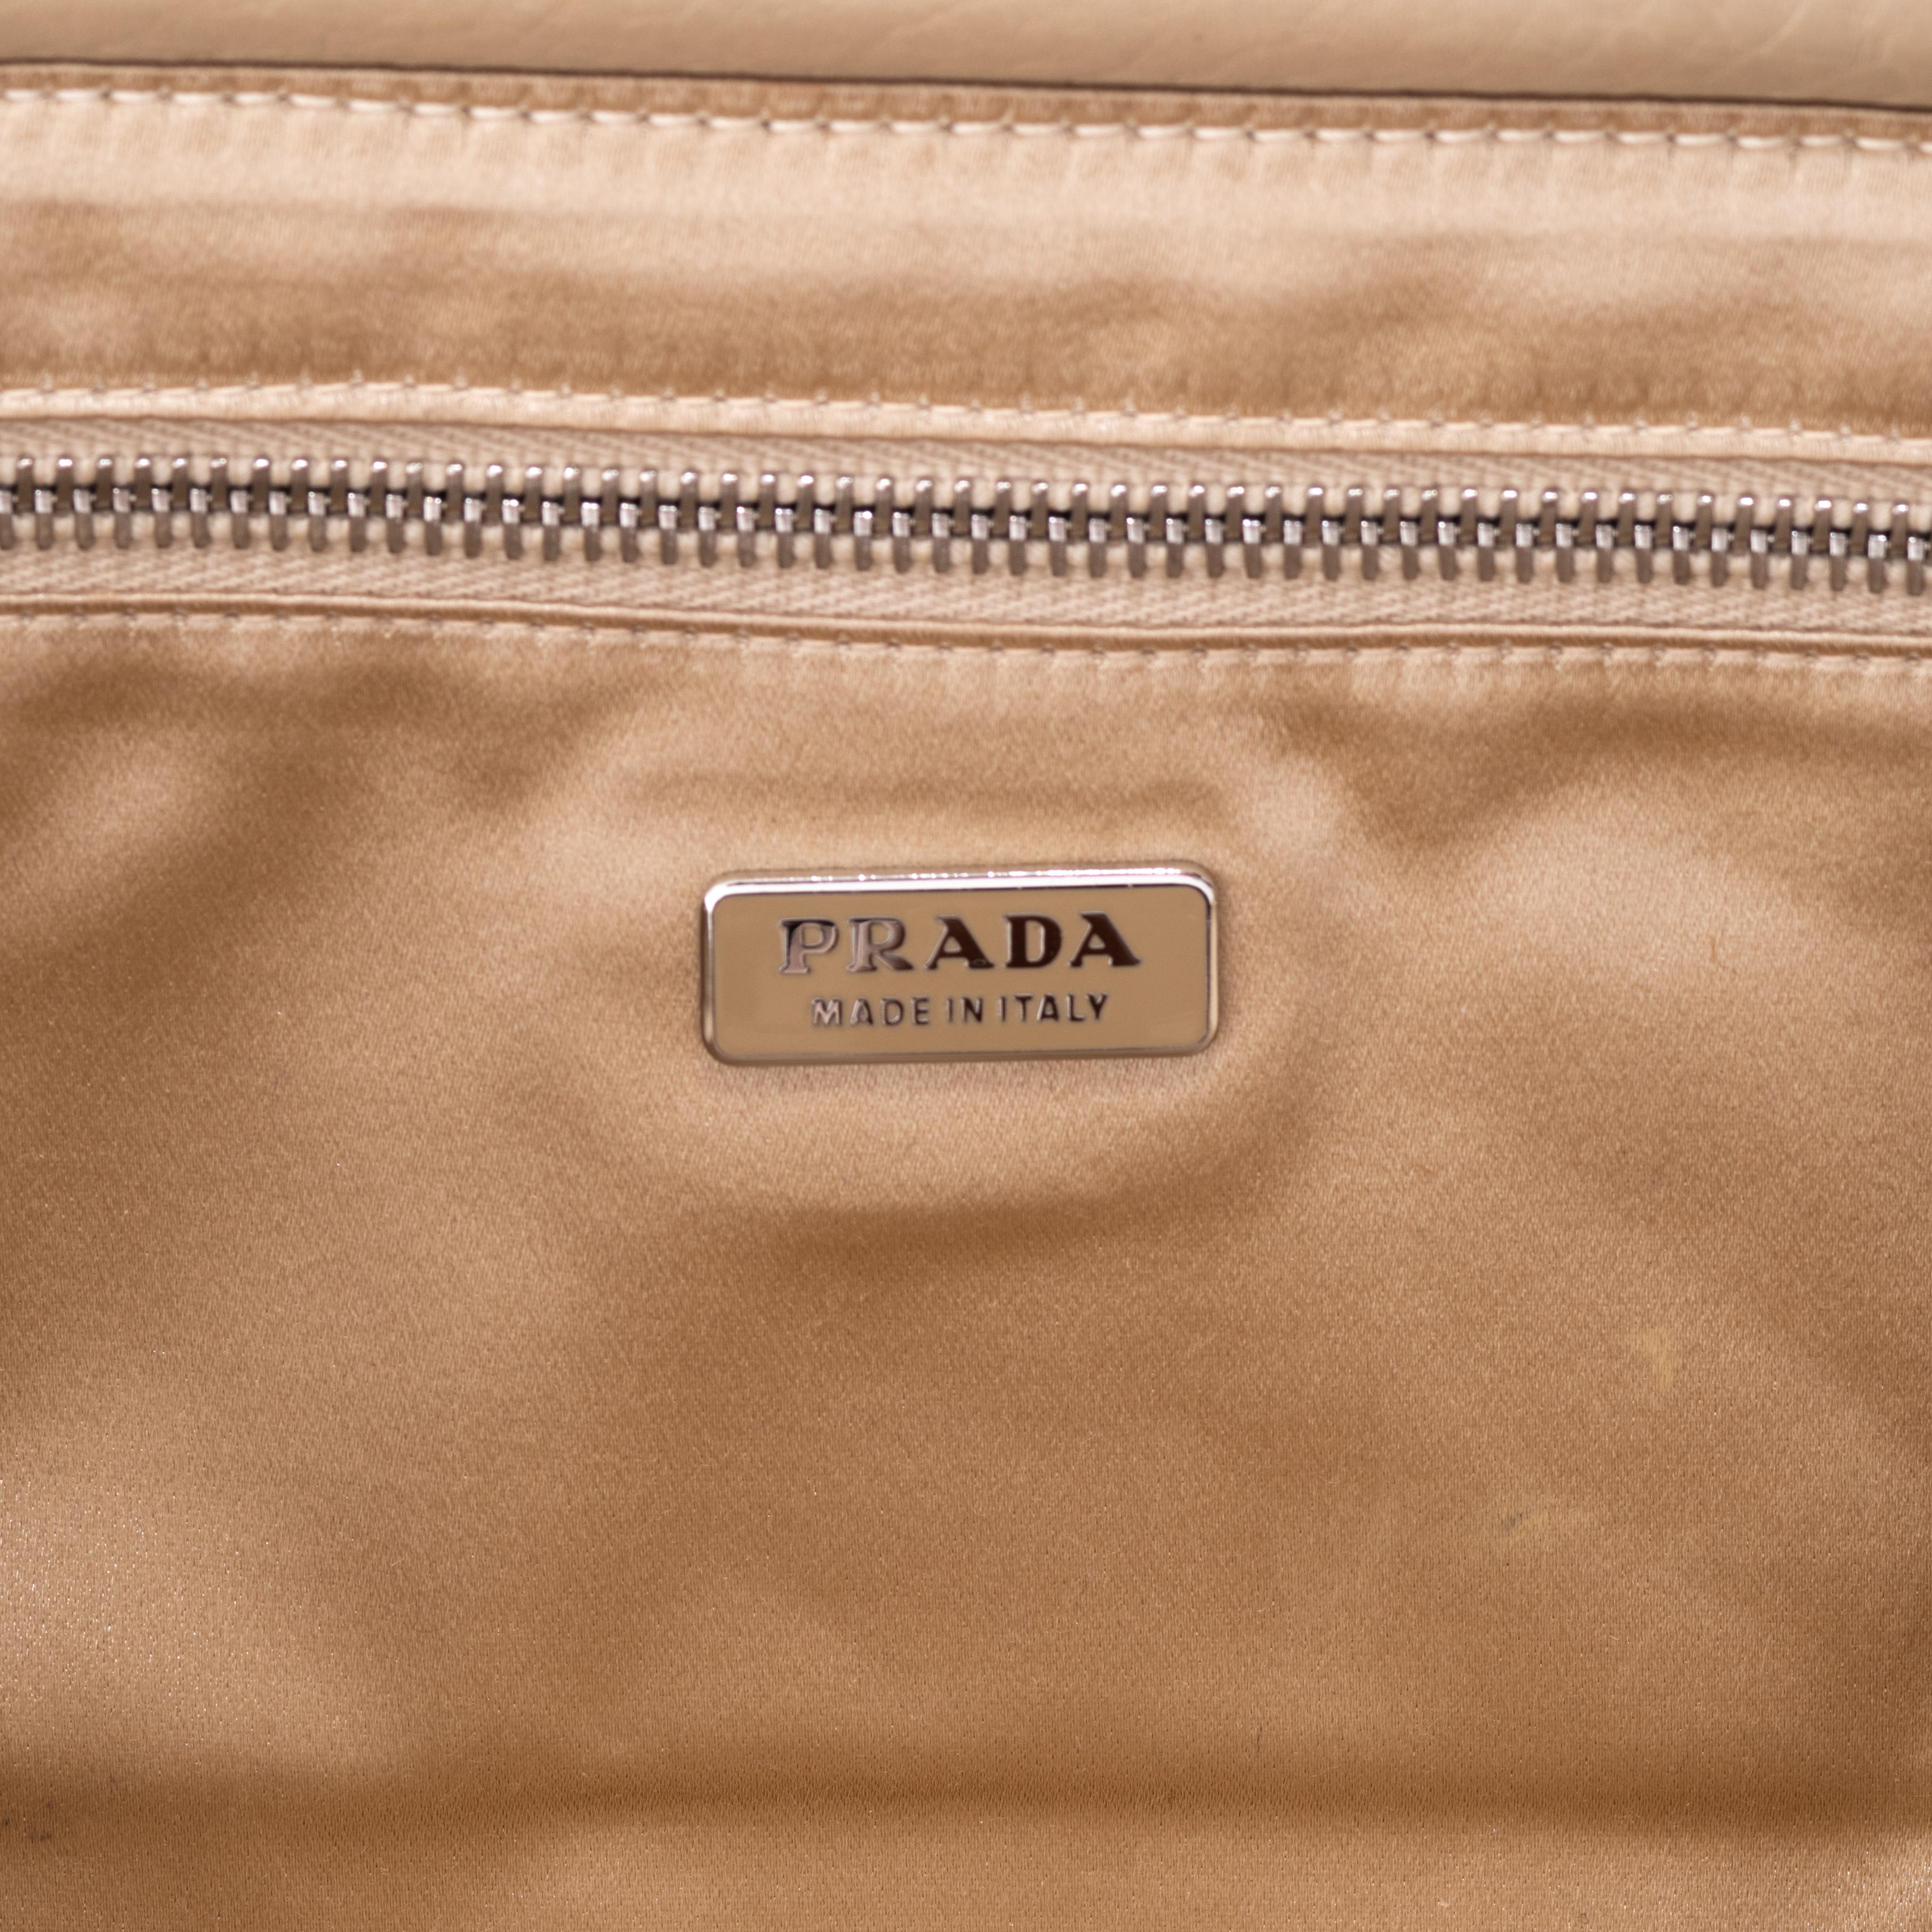 Prada cream leather beaded flap bag with metal bar handle, ss 2003 In Excellent Condition For Sale In London, GB